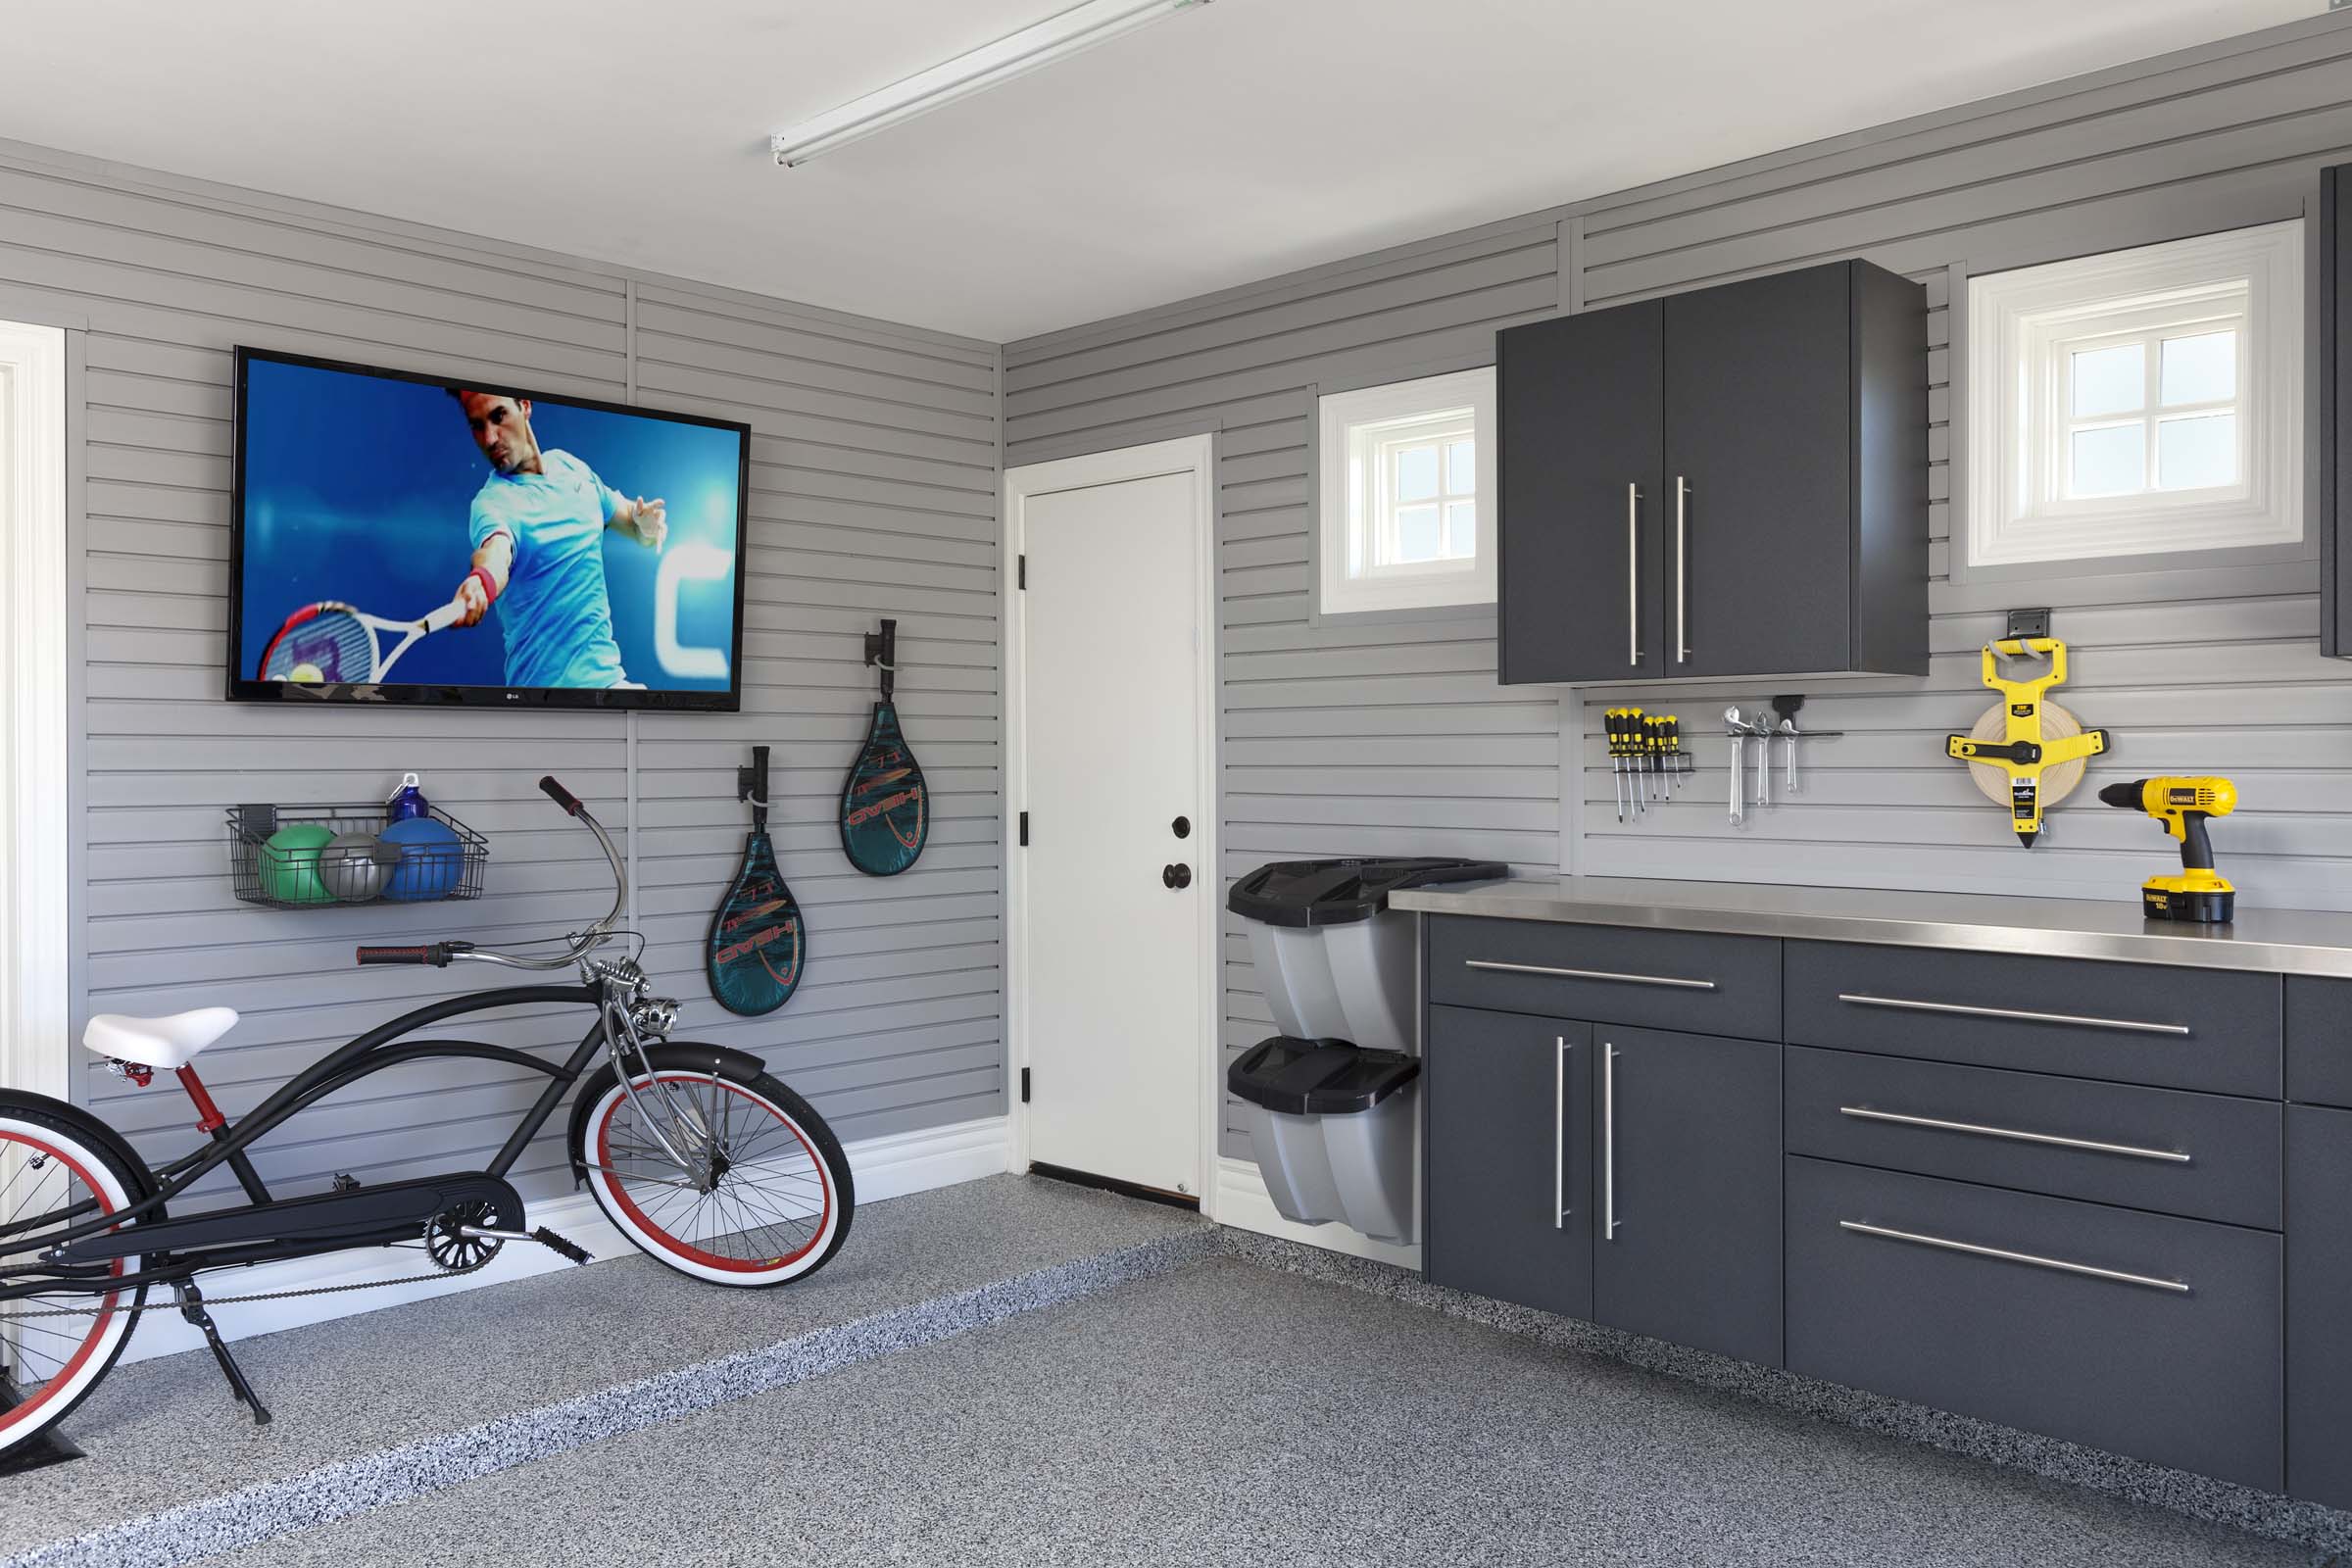 https://images.squarespace-cdn.com/content/v1/57a8bd14f7e0abfd89cda80c/1523648156682-ZXQDG6AMU98PCJ29RYLY/Custom+Garage+Cabinets+and+Tool+Storage+by+Closets+of+Tulsa